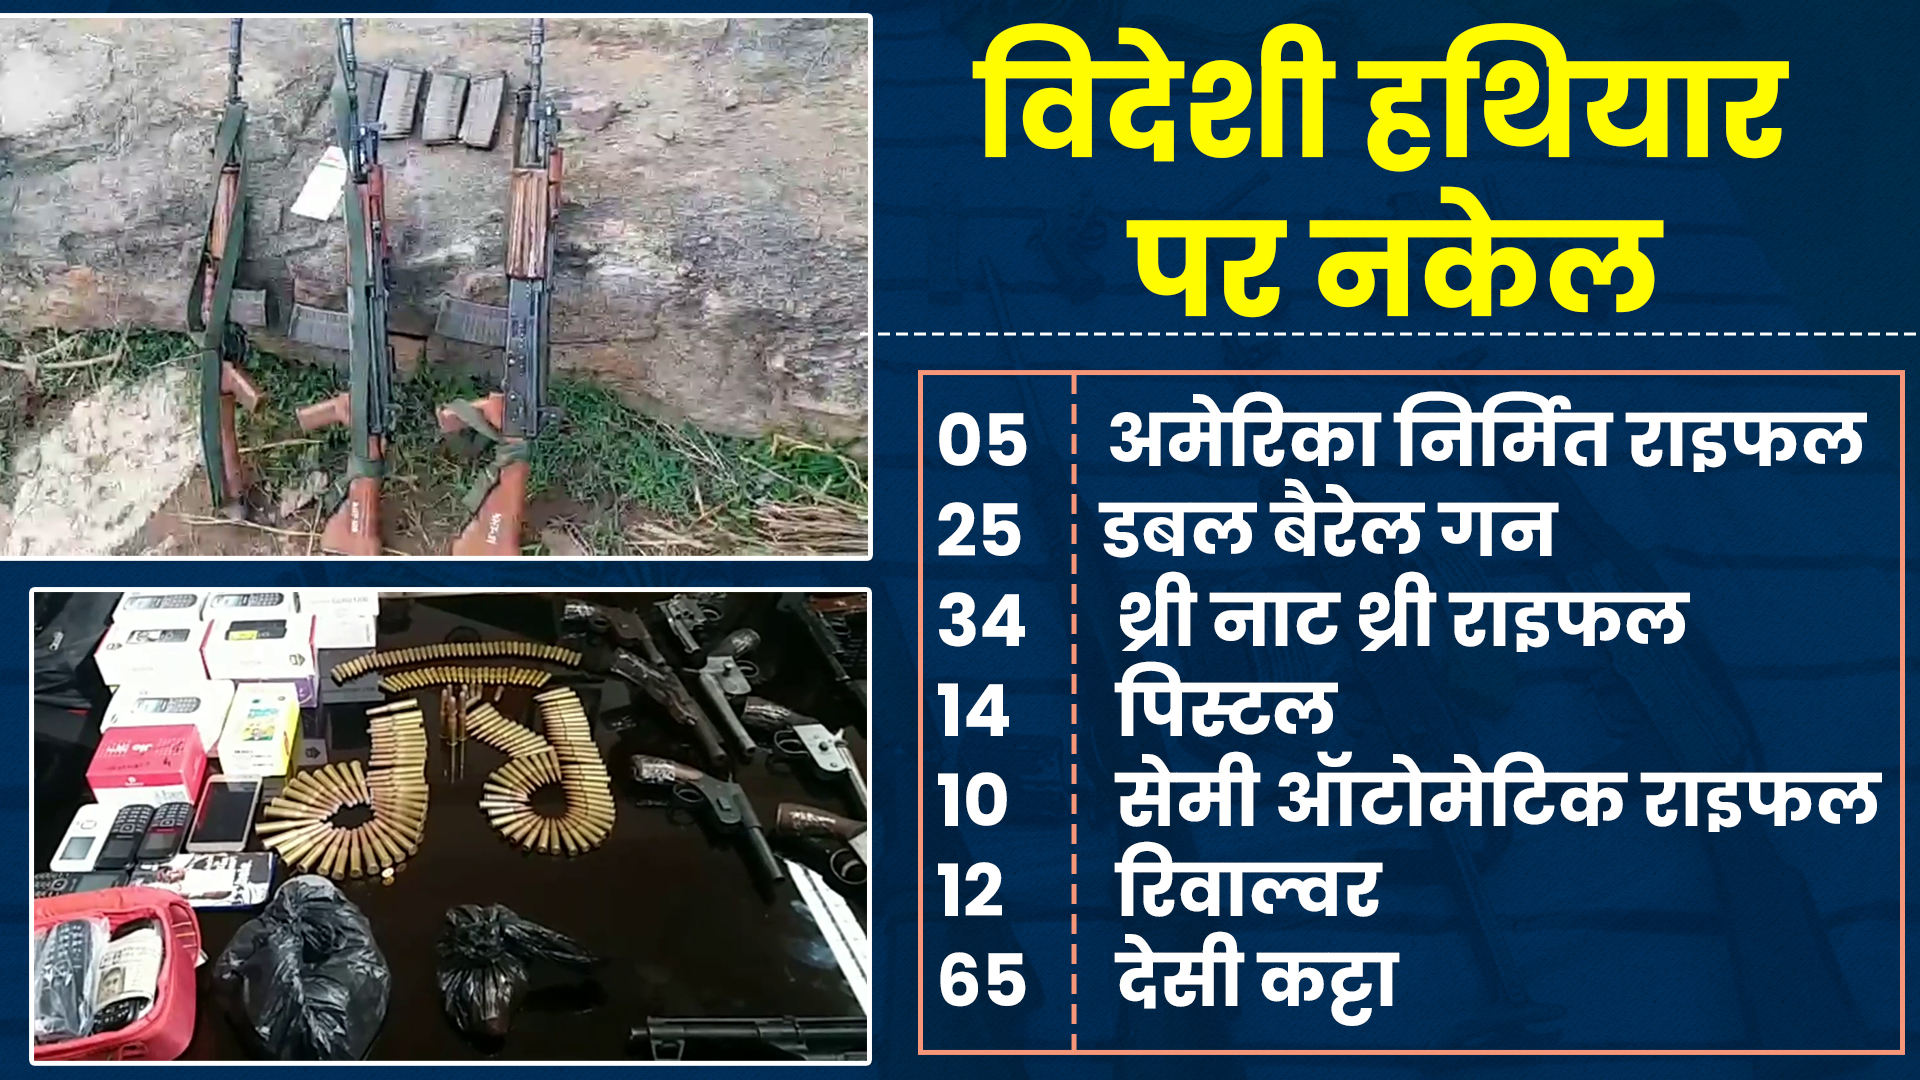 naxalites-getting-stronger-with-foreign-weapons-in-jharkhand